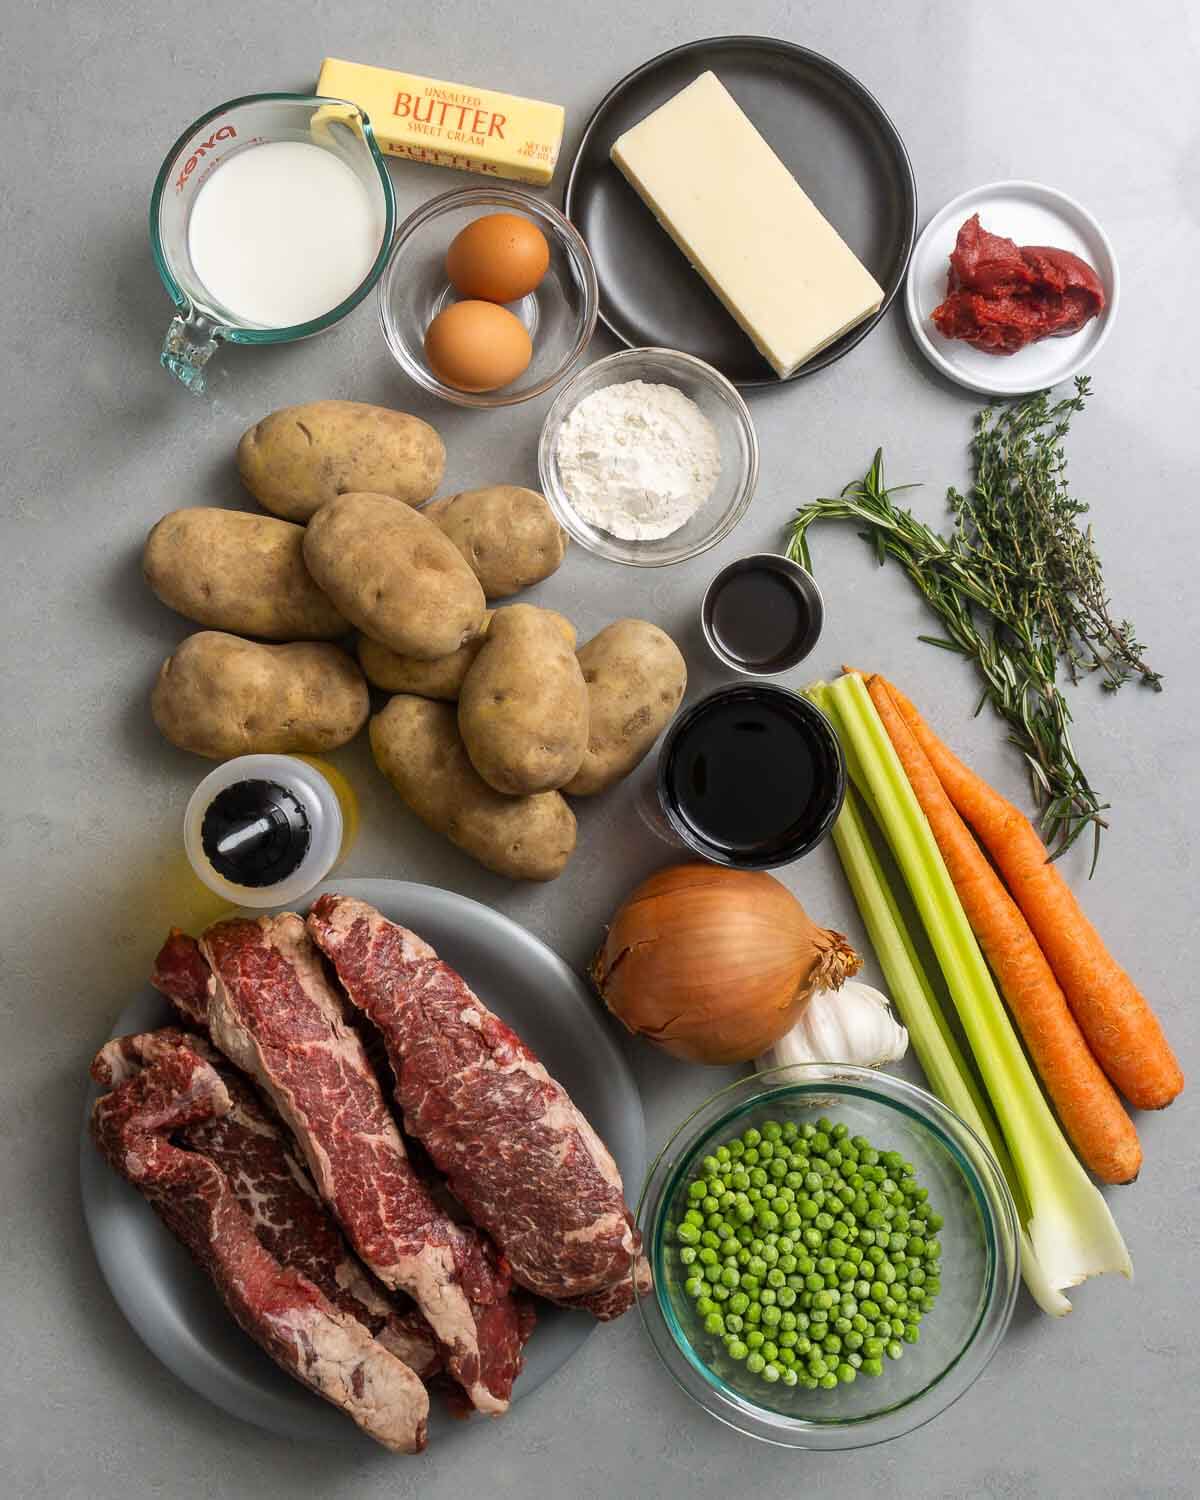 Ingredients shown: milk, butter, eggs, cheddar, tomato paste, flour, worcestershire sauce, herbs, potatoes, red wine, olive oil, celery, carrots, garlic, onion, peas, and boneless short ribs.